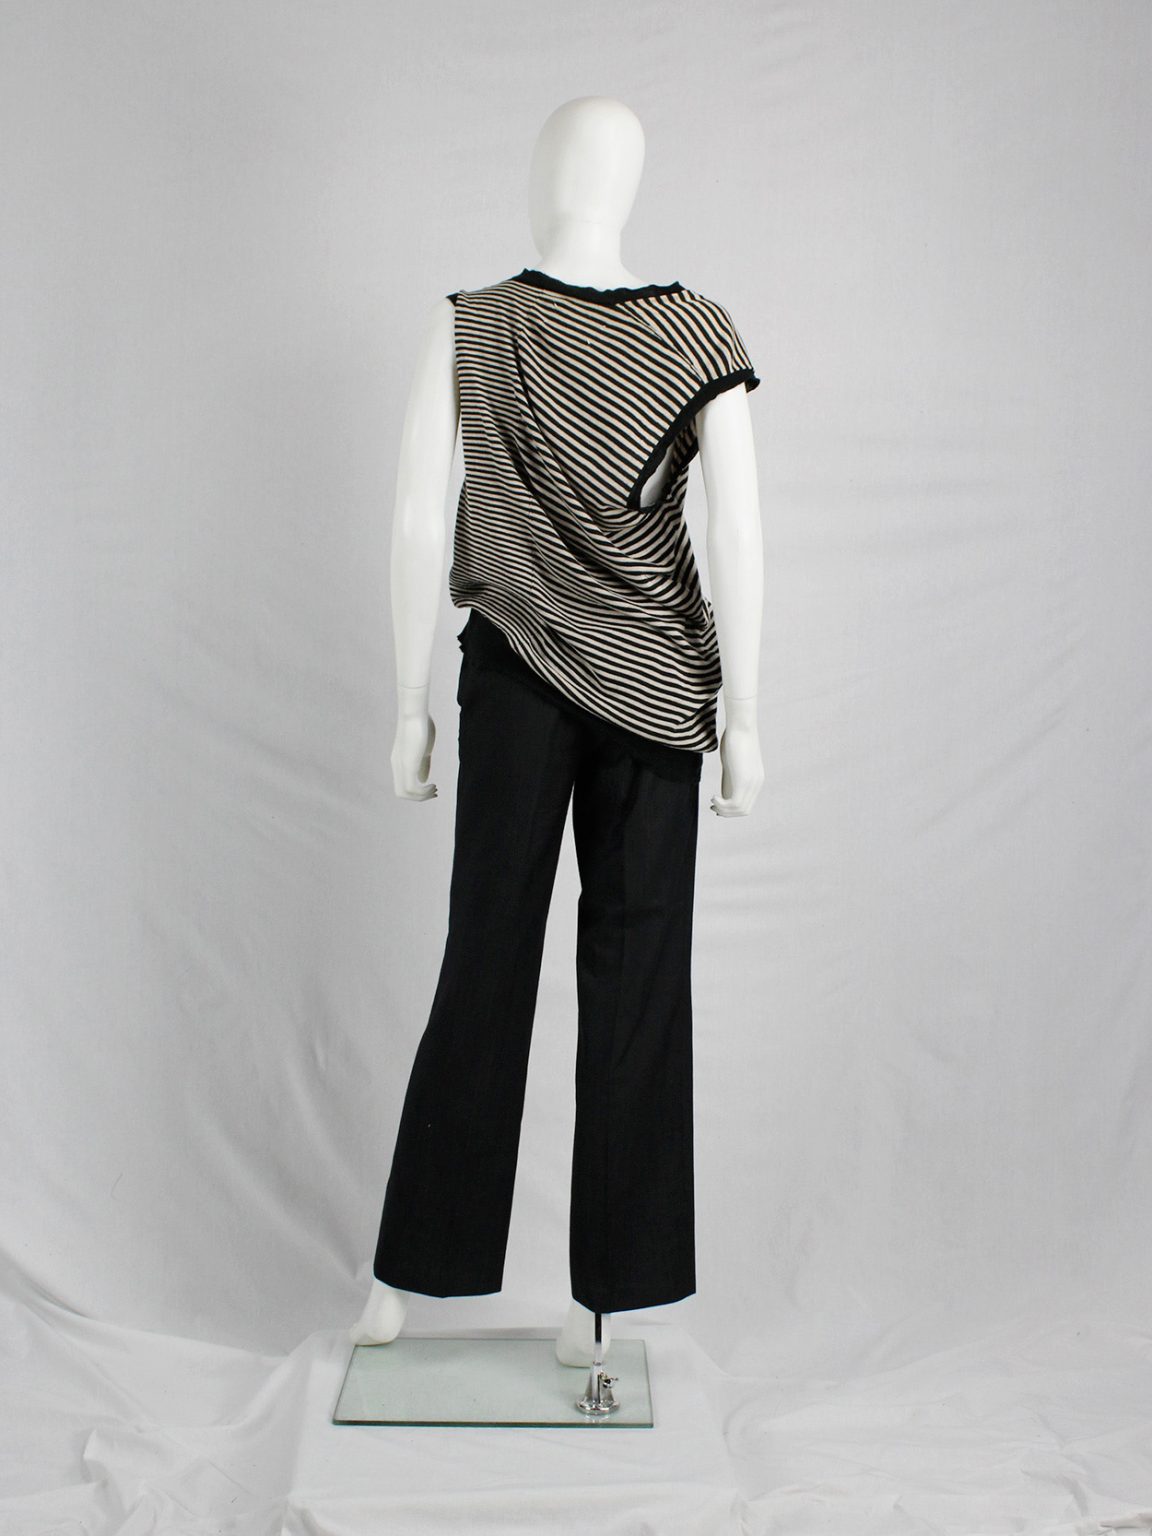 Maison Martin Margiela beige and black striped top, stretched out on one side — spring 2005